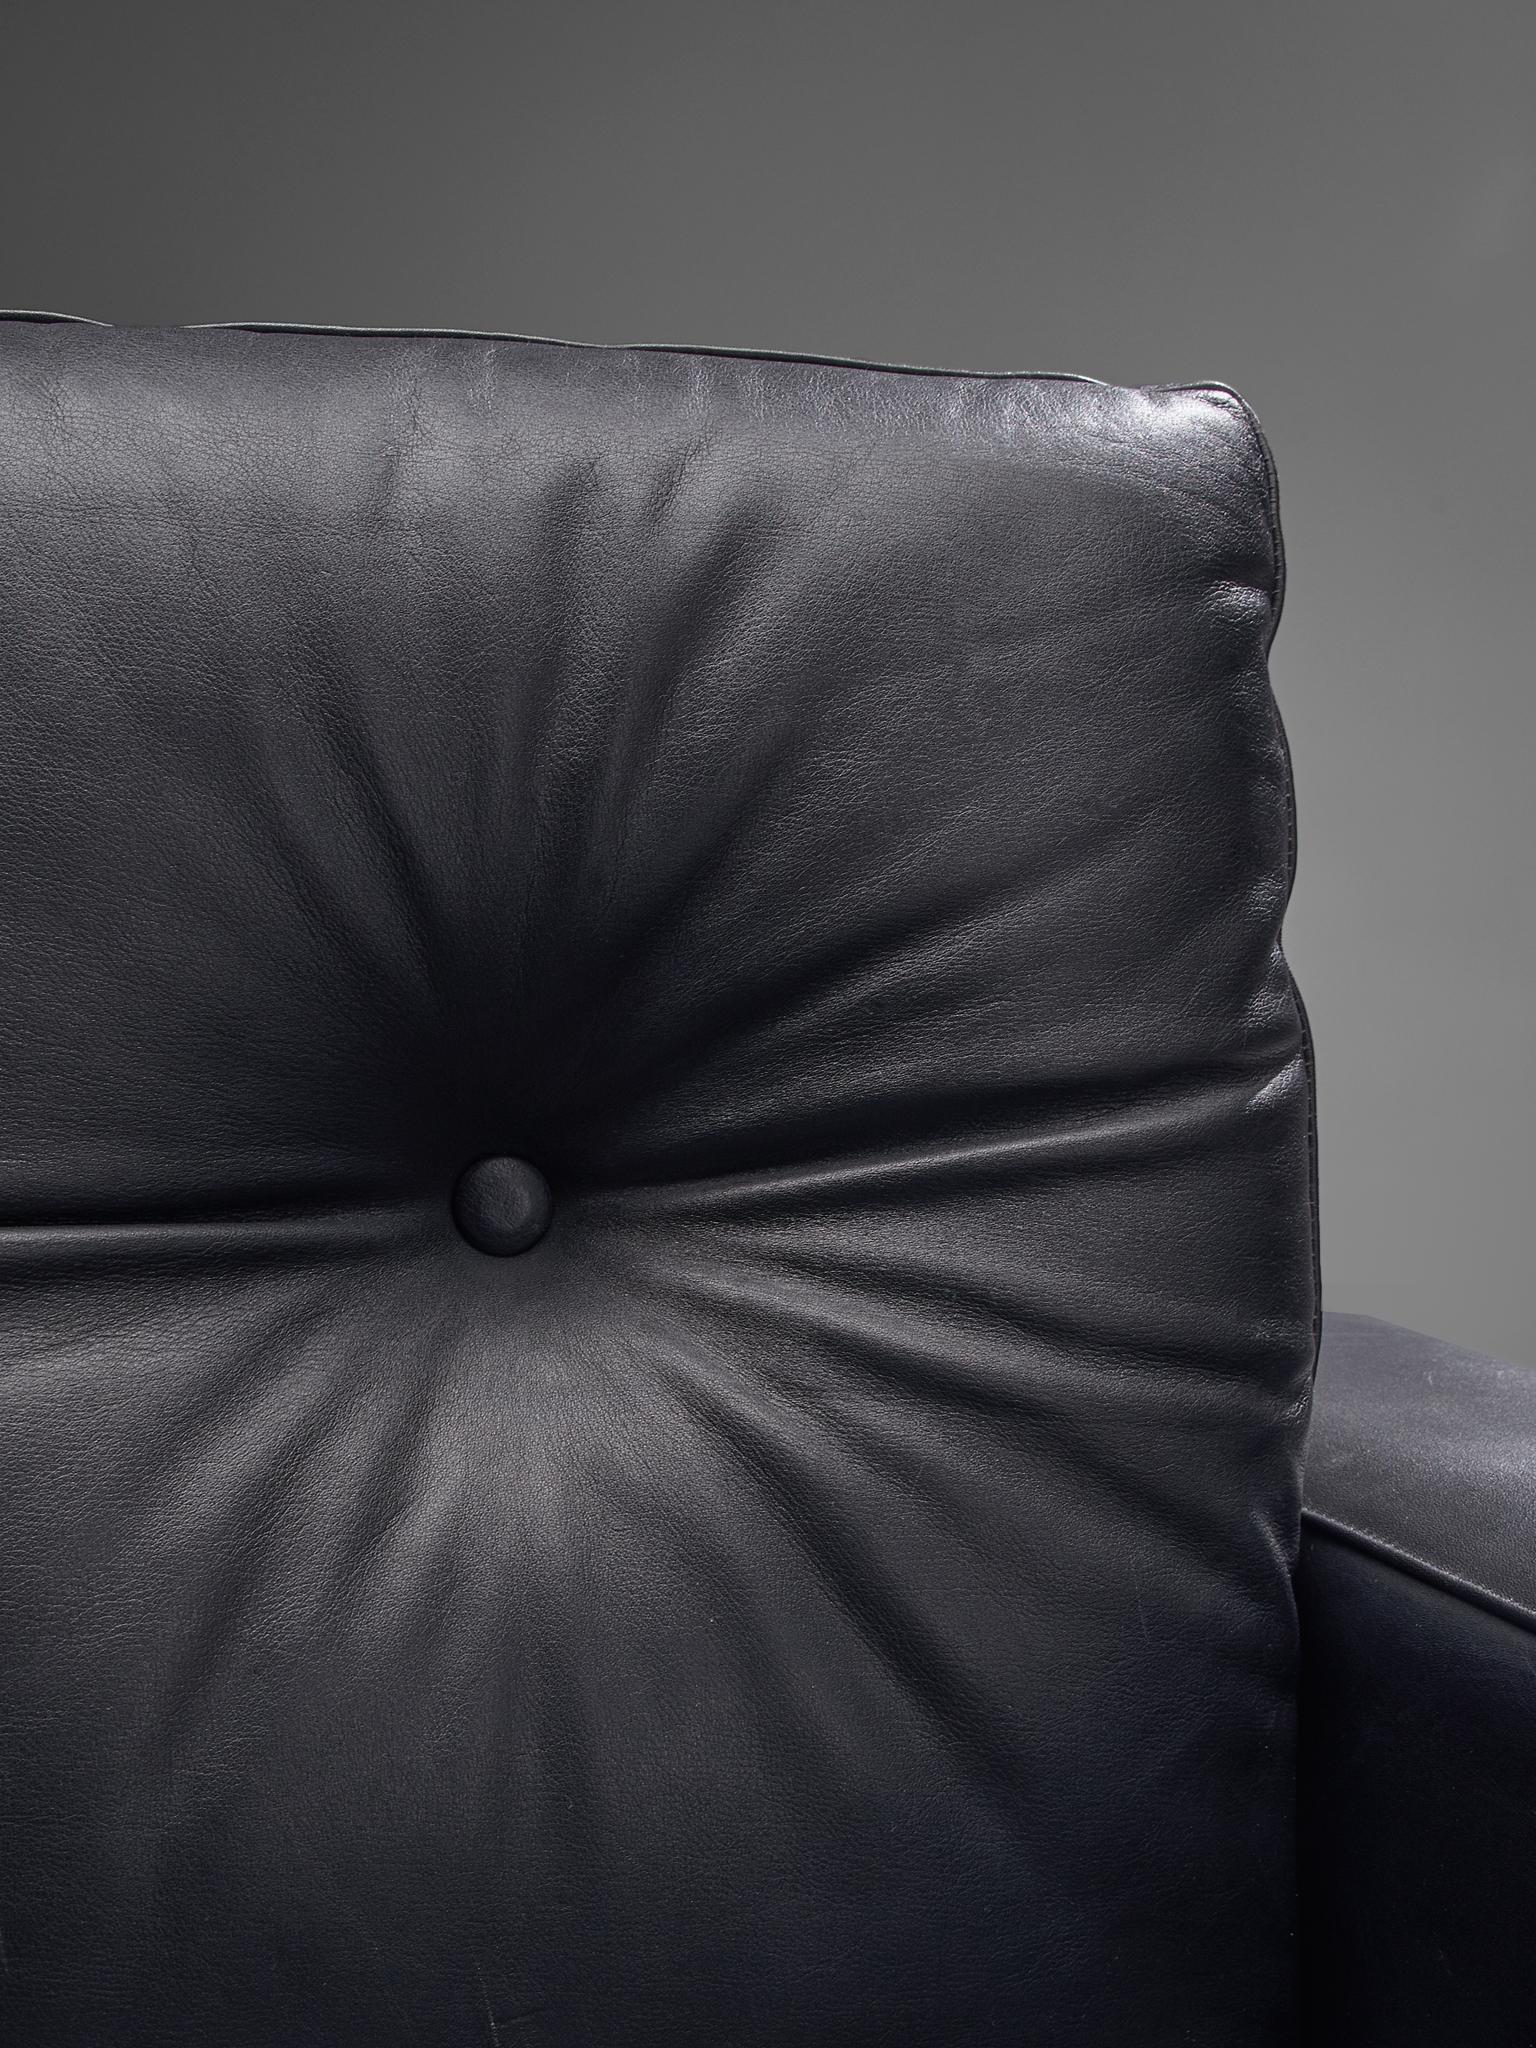 Pair of Armchairs in Black Leather by Franz Sartori for Flexform 3